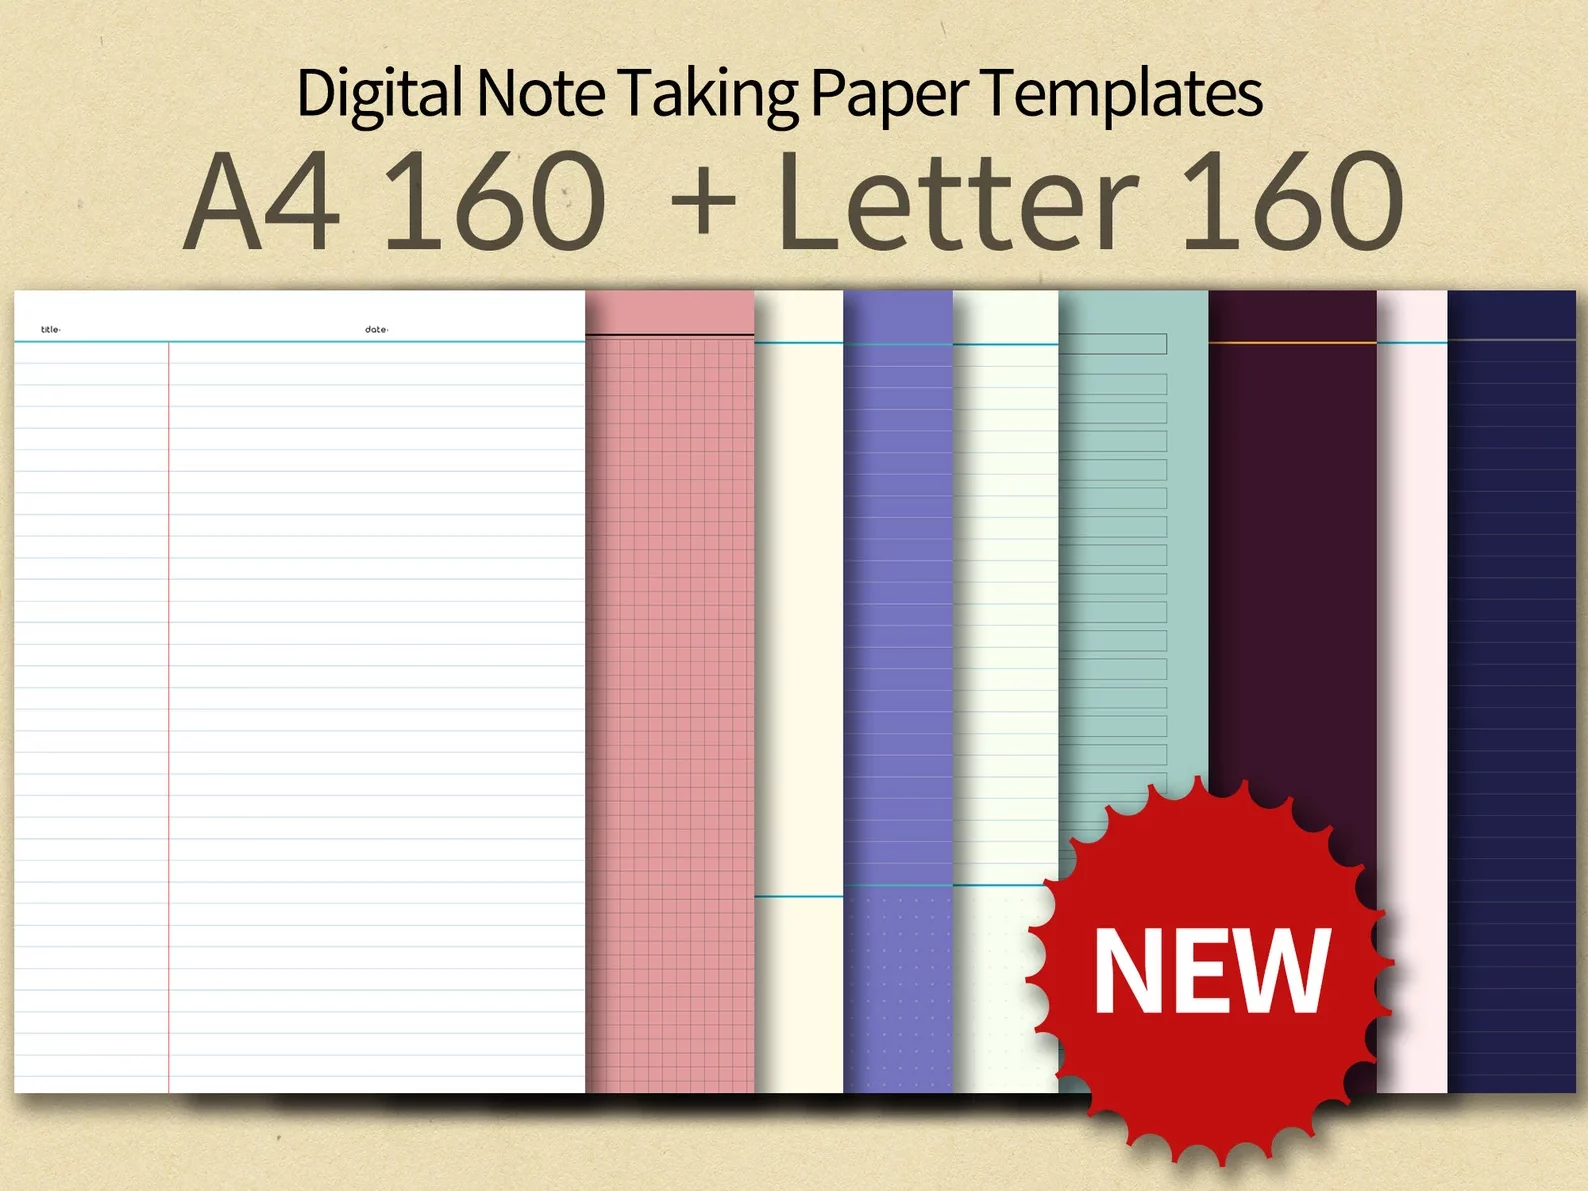 9 notetaking templates of different colors stacked next to eachother 